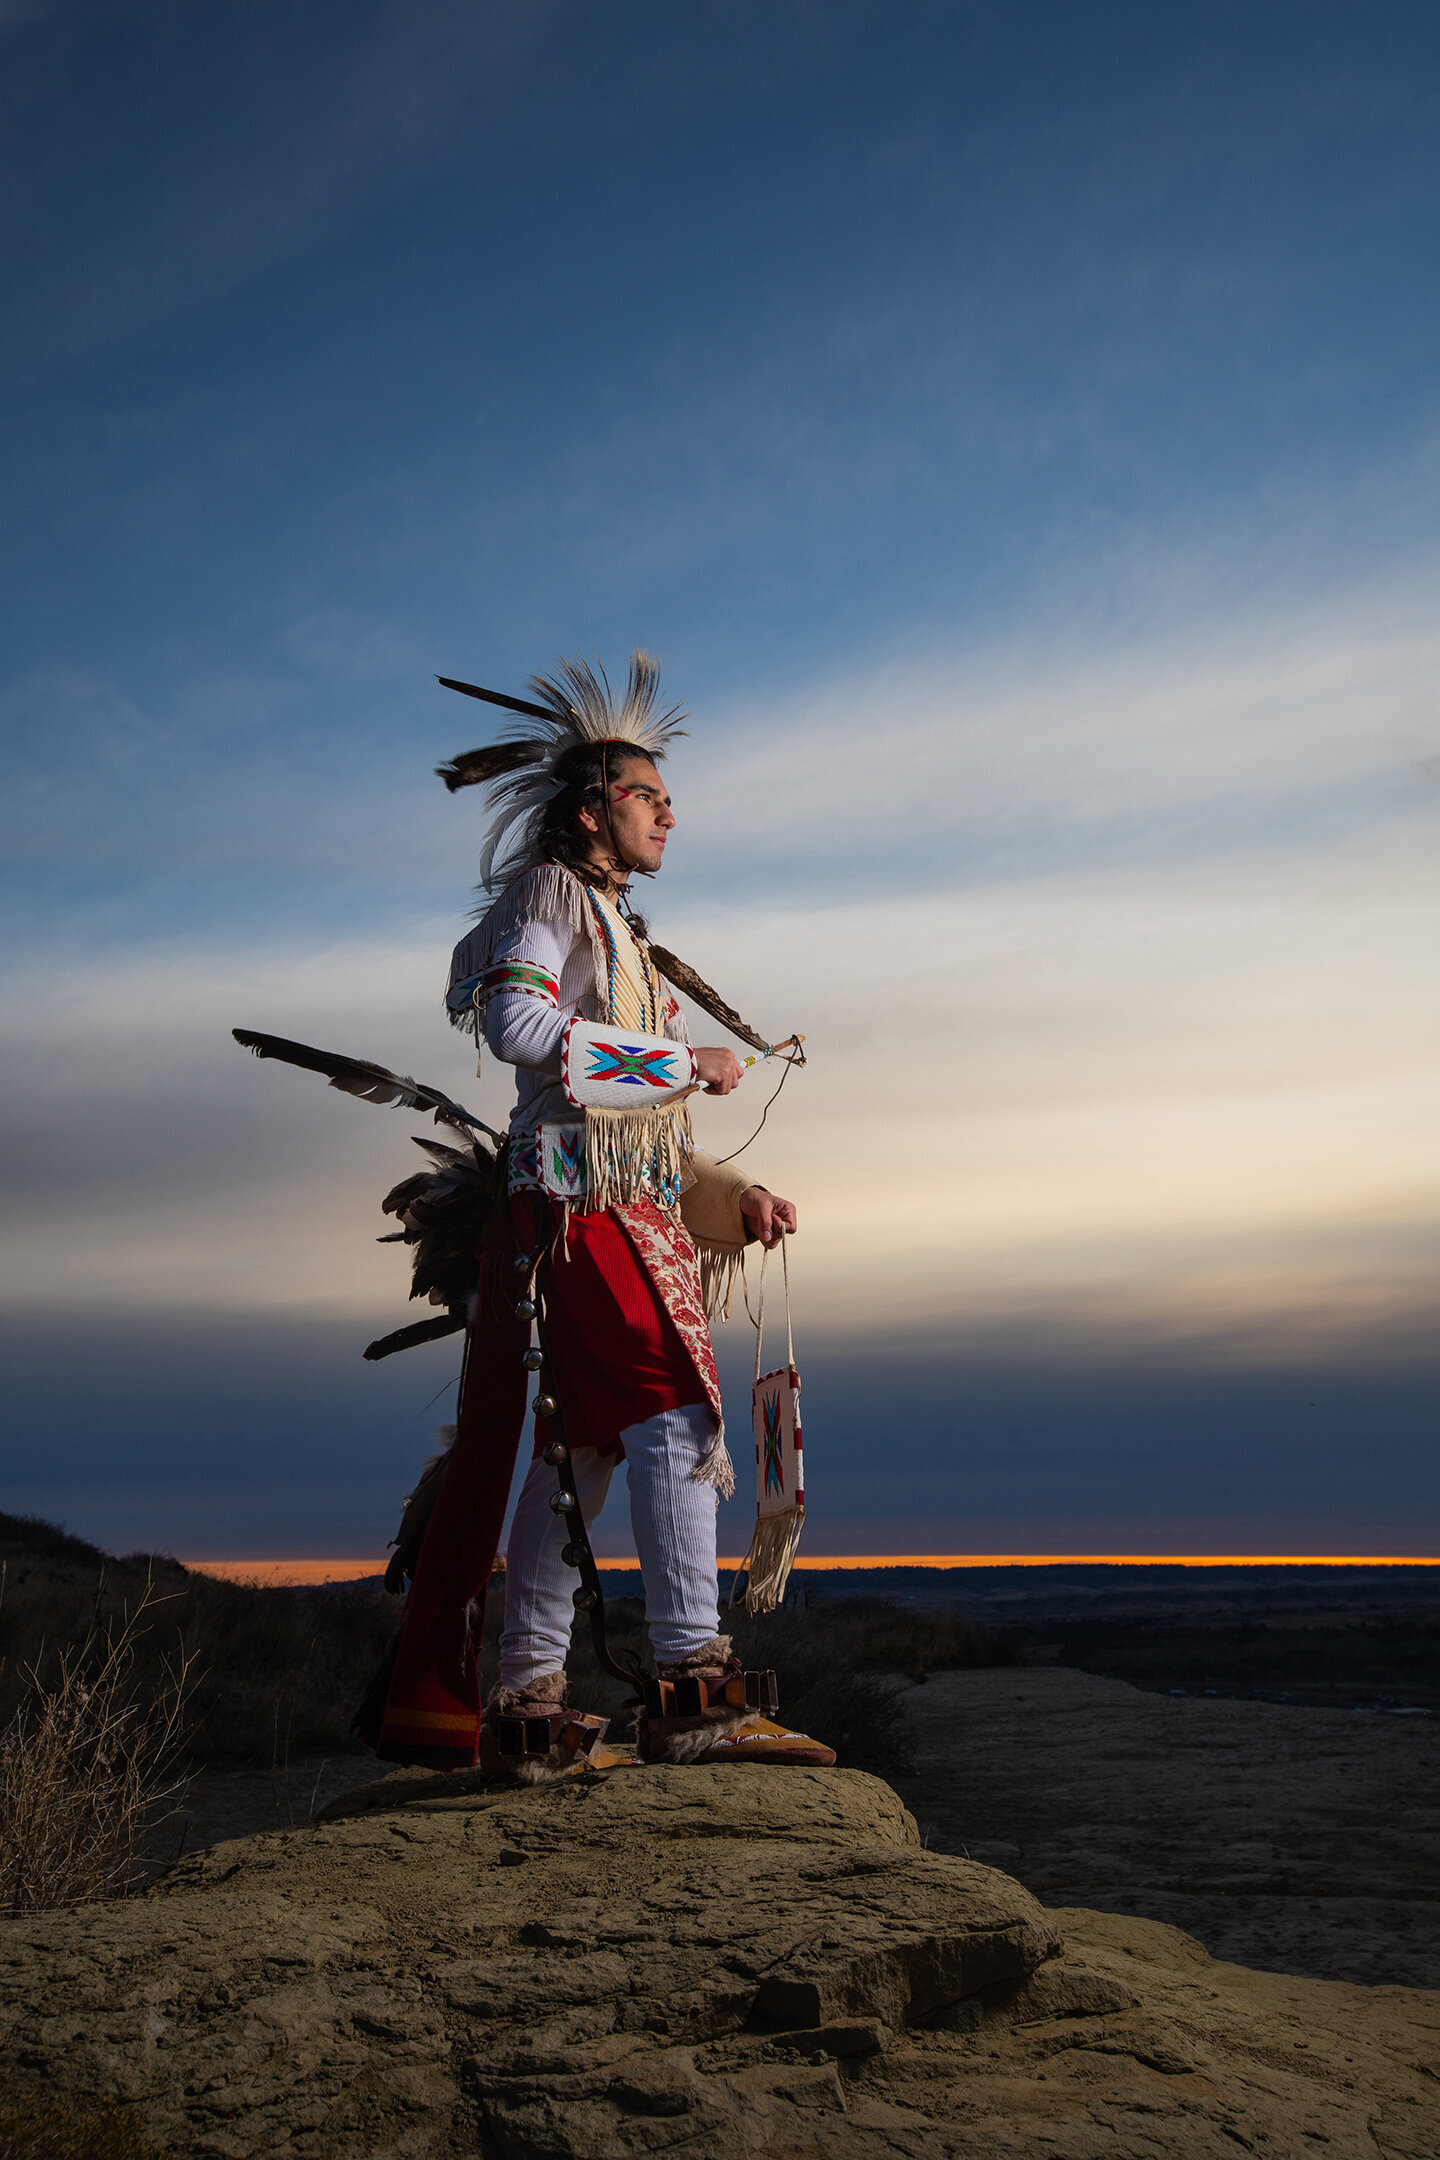 Photographers near me. Native American in traditional Regalia. Picture taken at Swords Park in Billings Montana. Feathers, beading, red and white at sunrise.